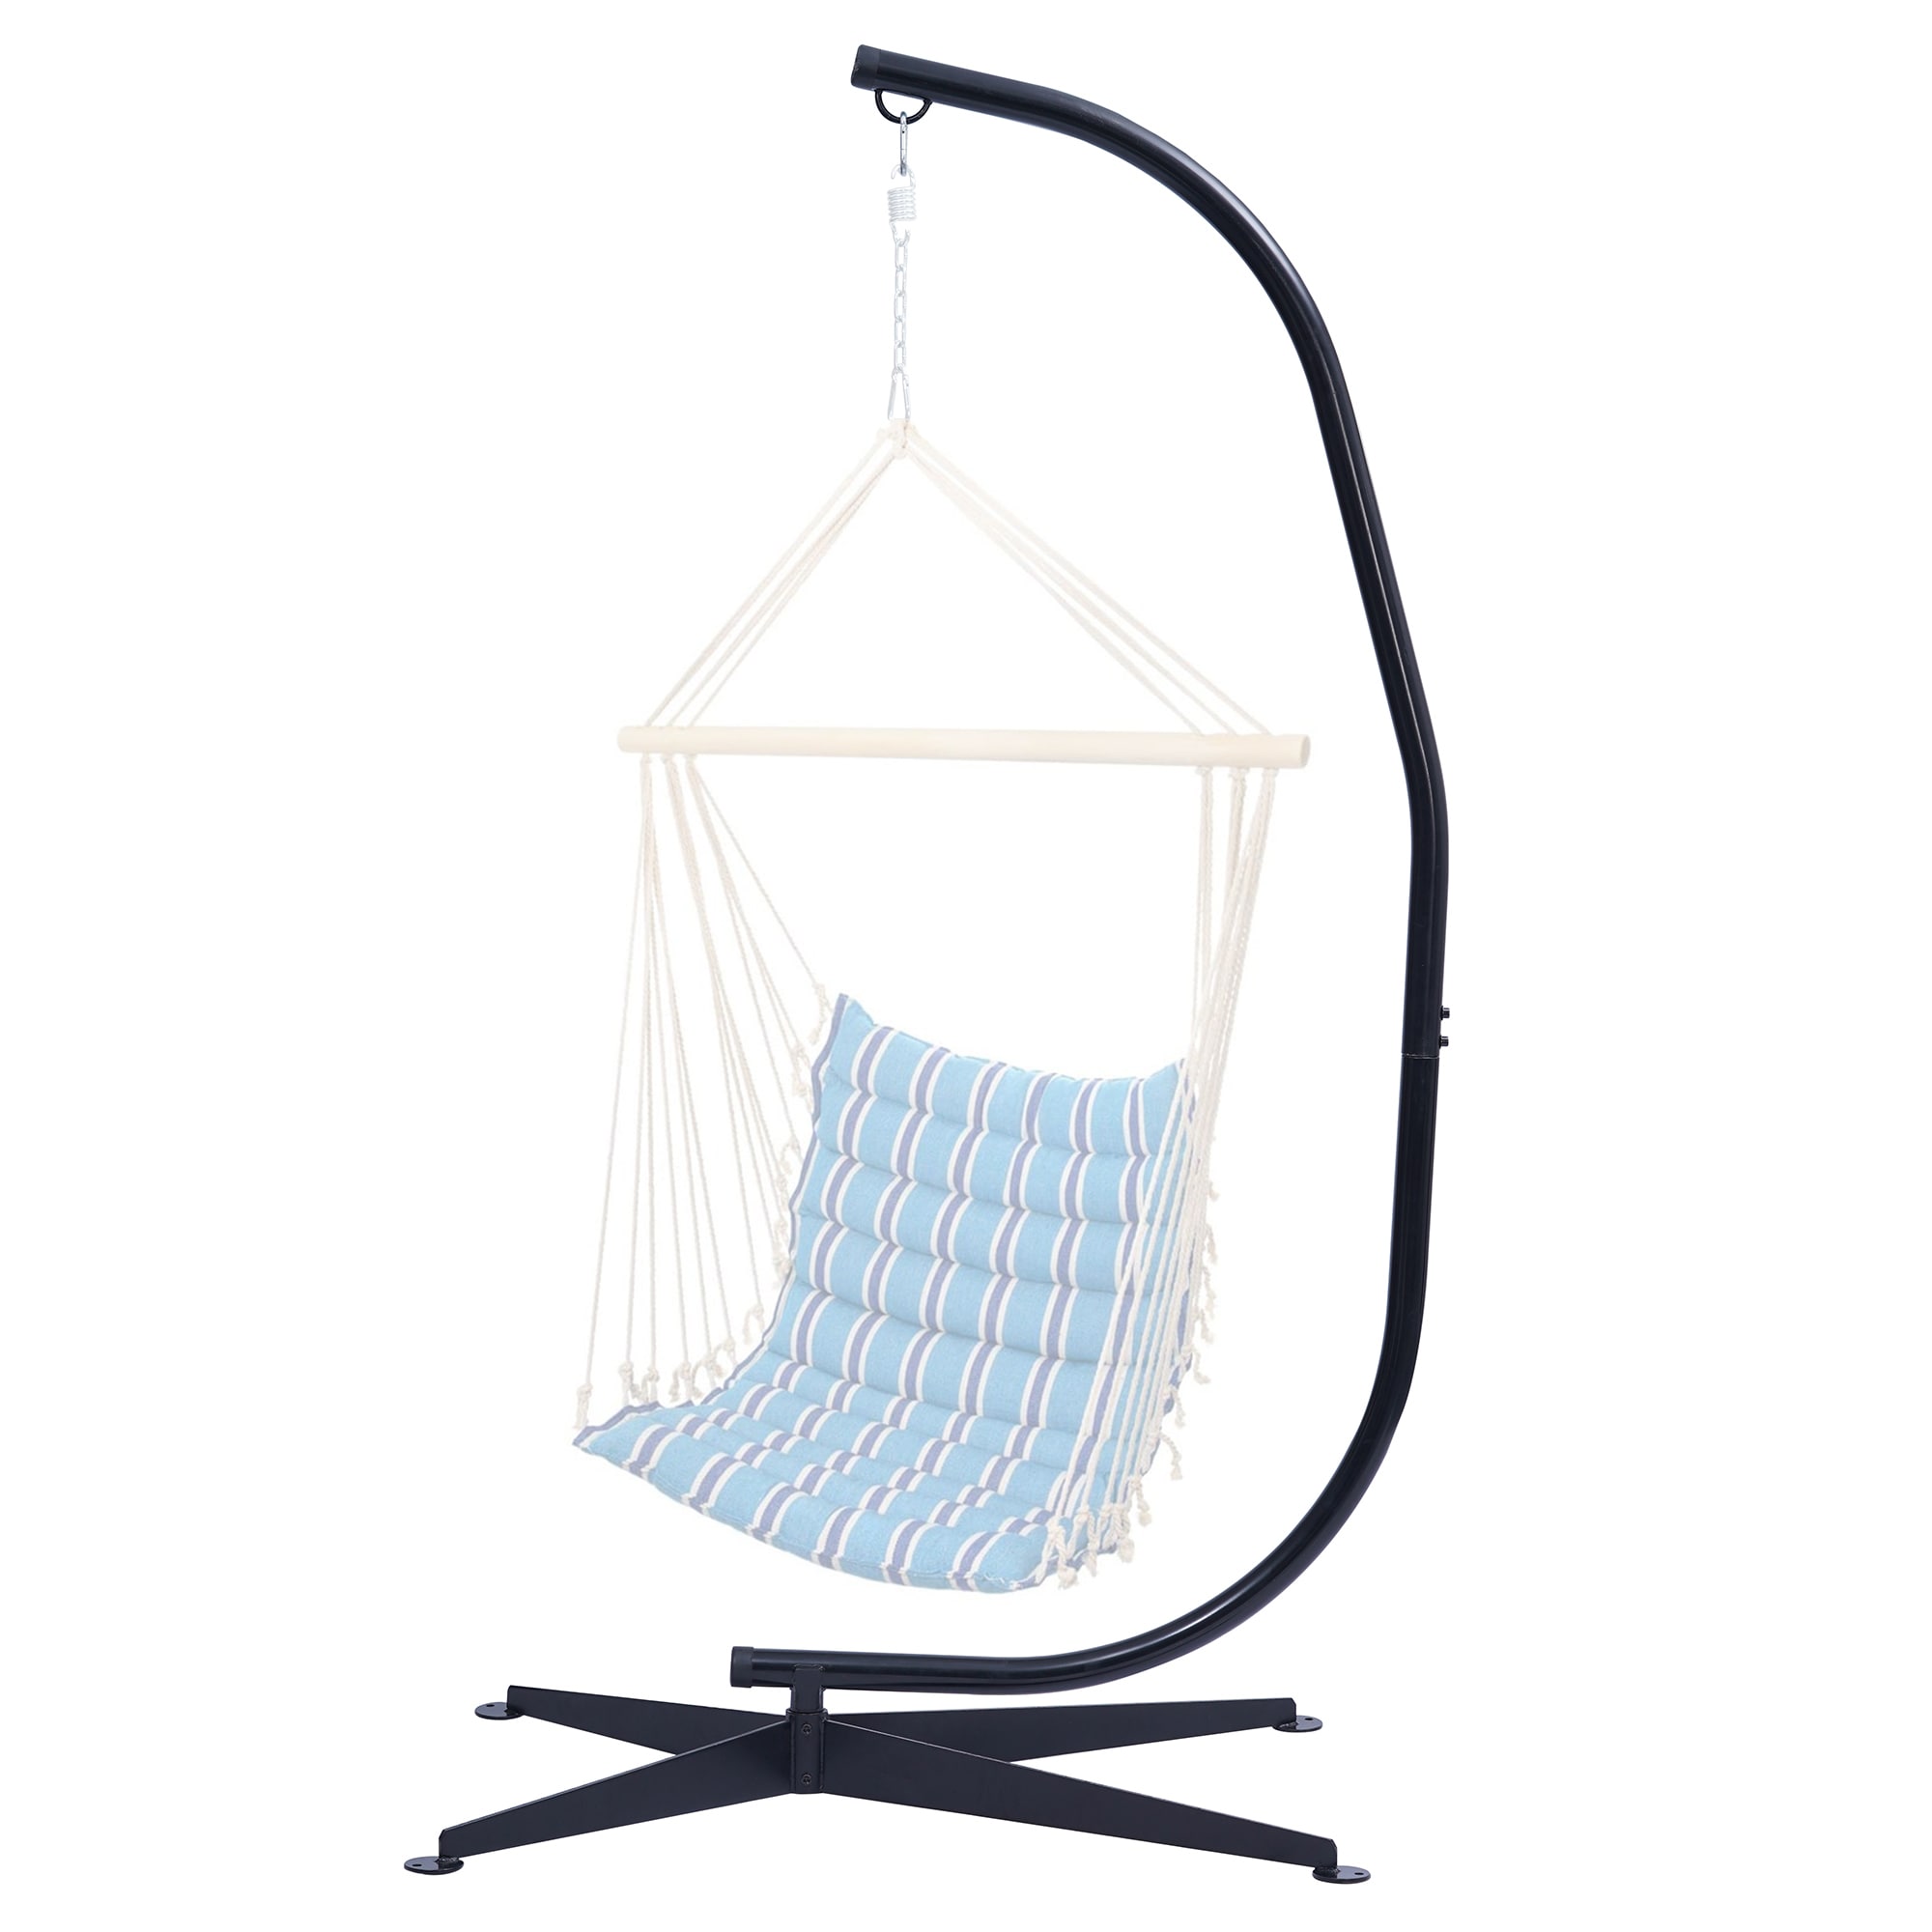 Hanging Egg Chair Stand Only Hammock Chair Stand,Heavy Duty for Swing Chair Stand C Stand for Hanging Chair,Chair Stand for Indoor Outdoor Bedroom Patio Garden 